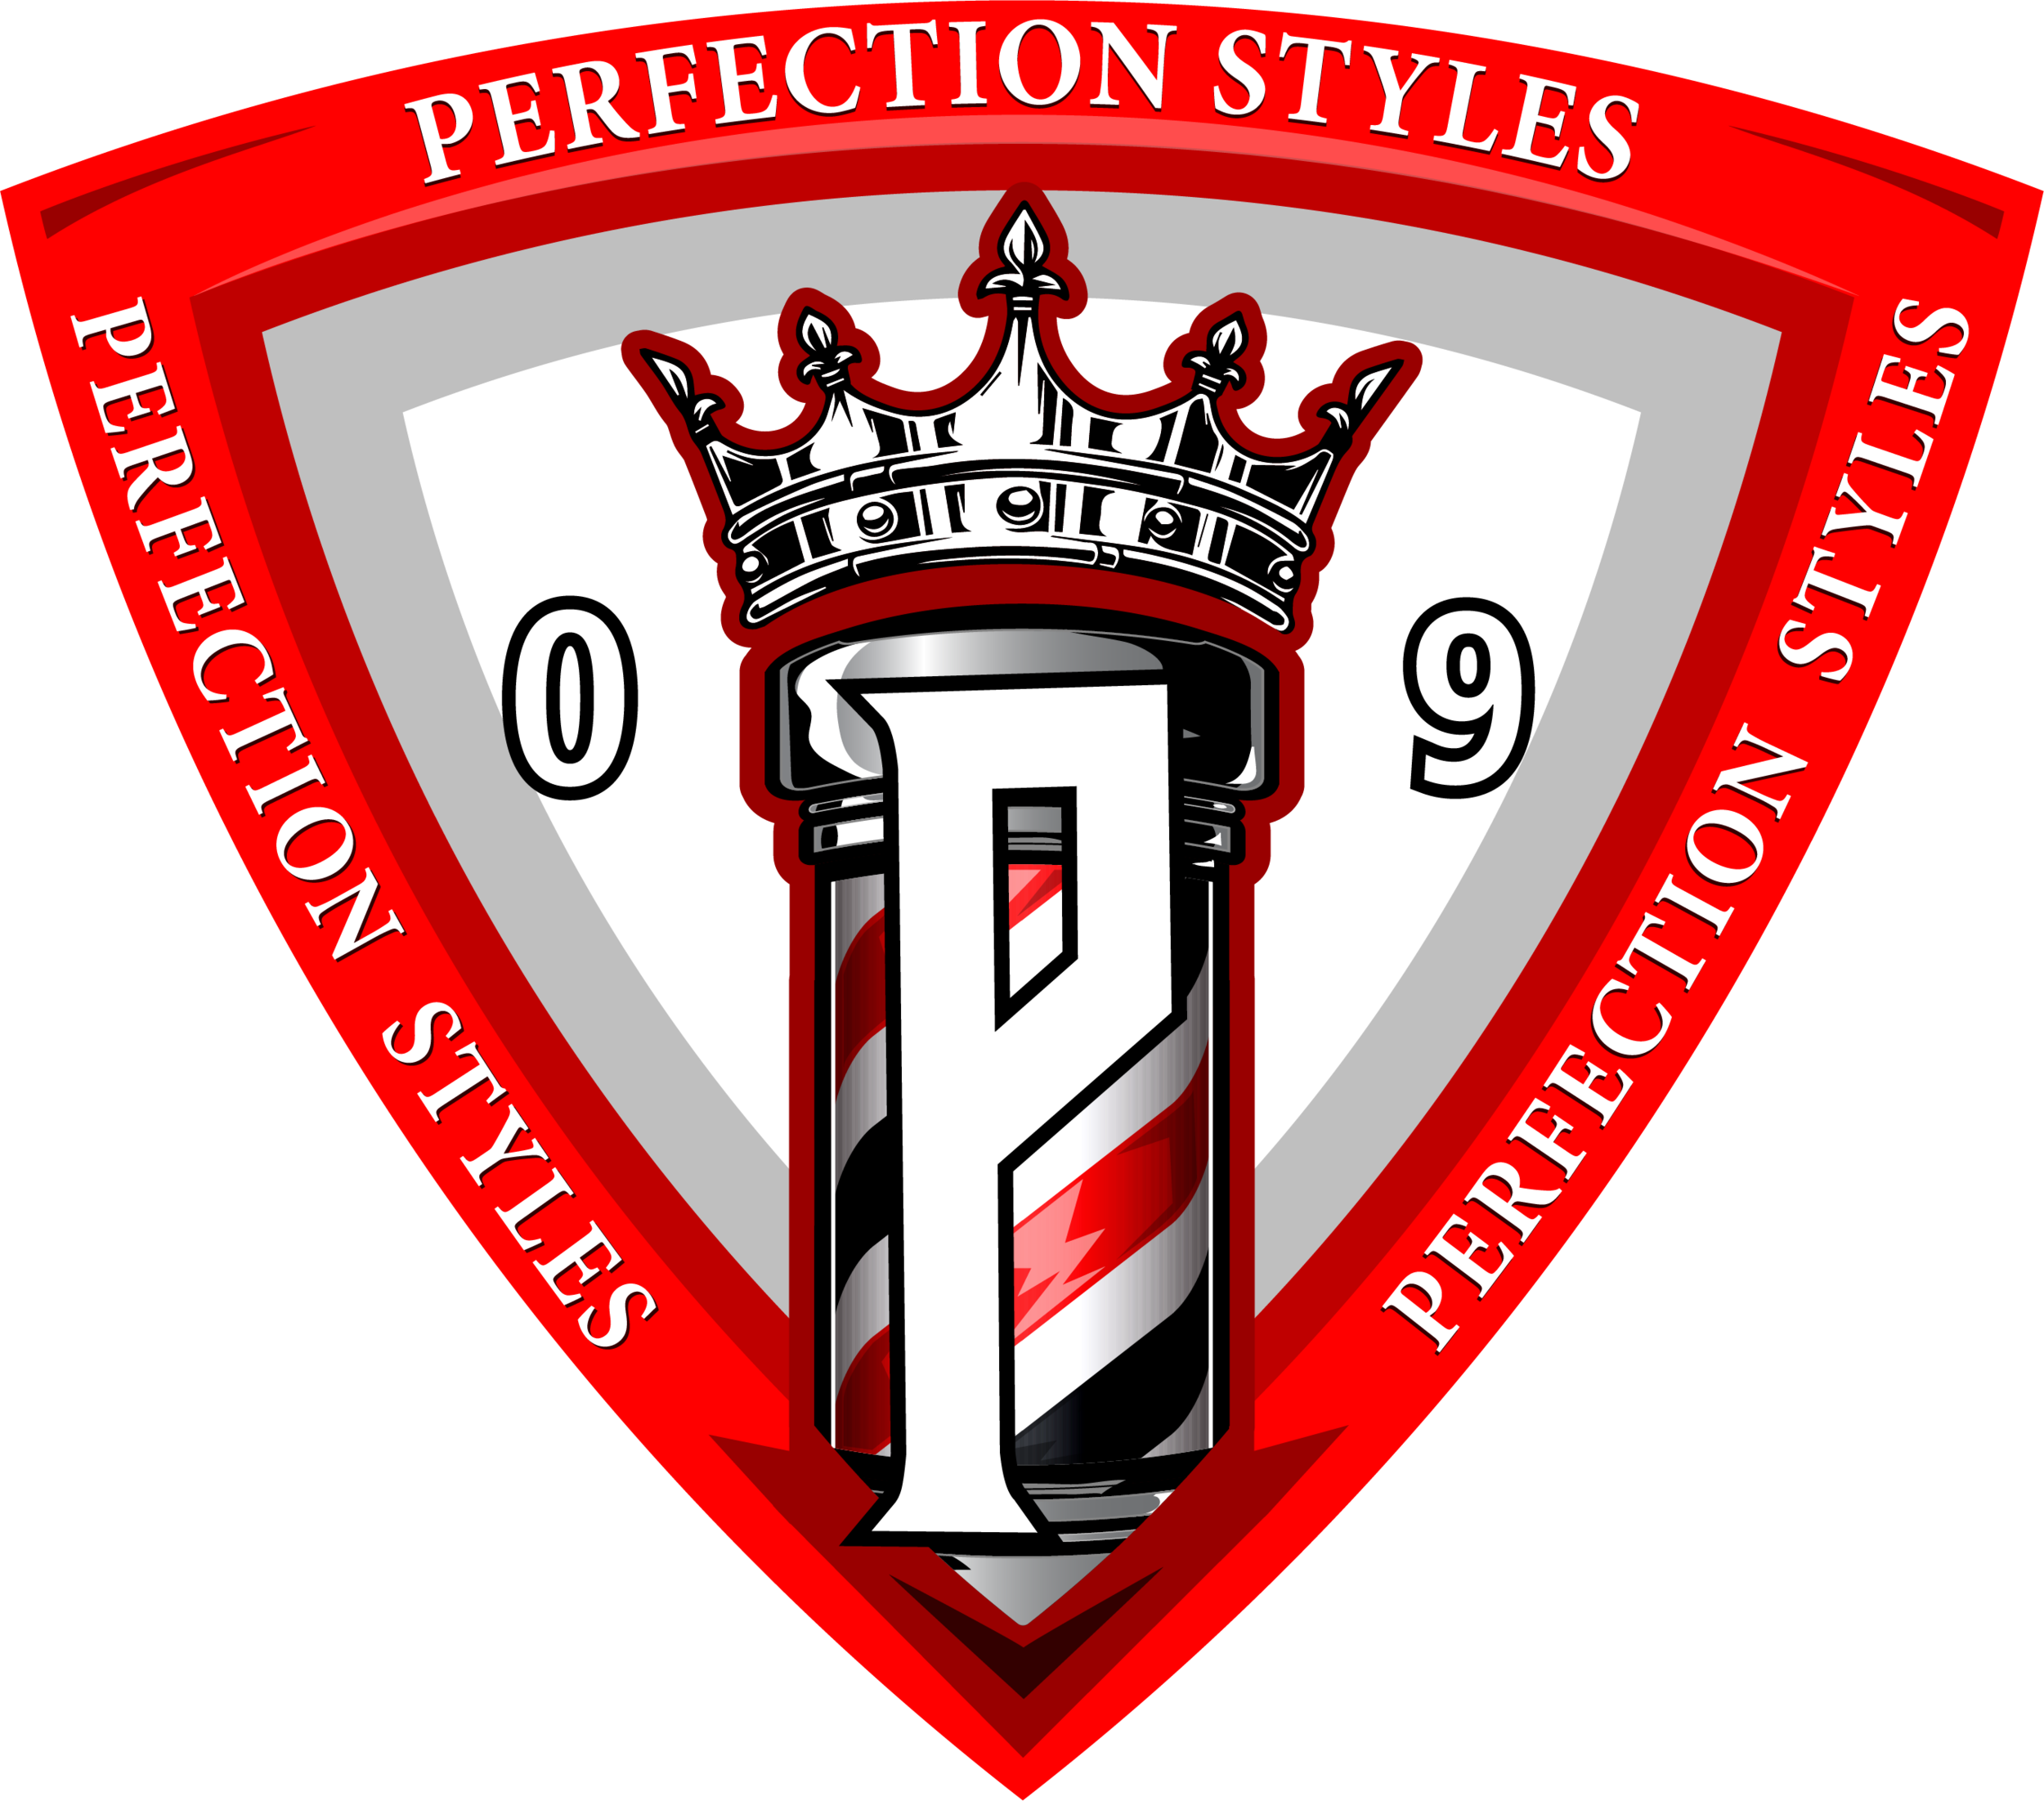 Perfection Styles